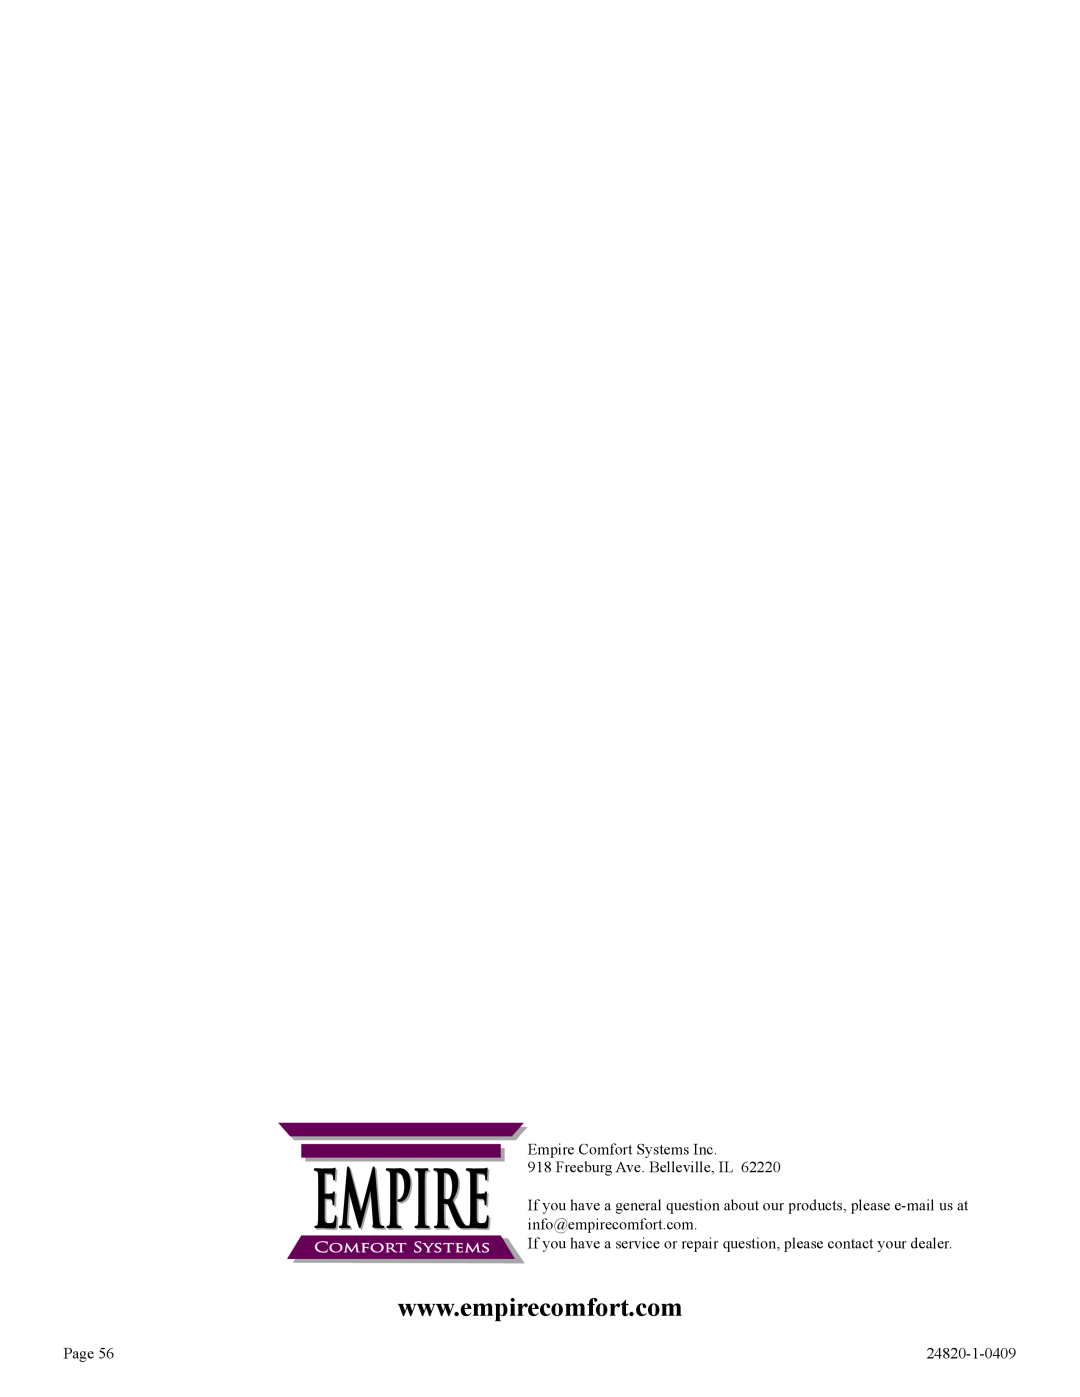 Empire Comfort Systems PV-28SV50-B2H(N,P)-1 Empire Comfort Systems Inc, EMPIRE 918 Freeburg Ave. Belleville, IL, Page 